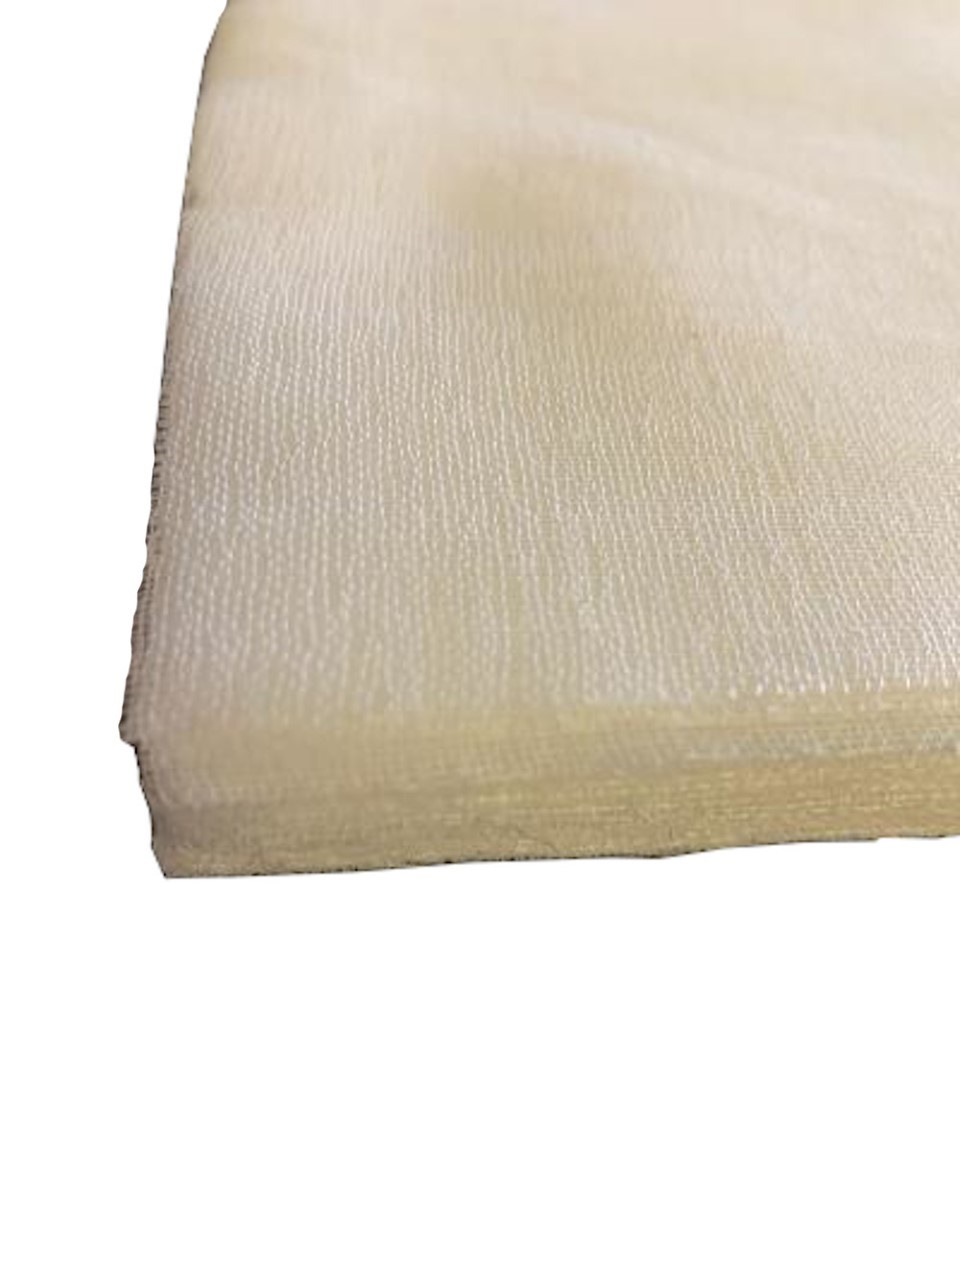 18" x 18" Grade 90 Cheesecloth Bleached Squares 100 Pk